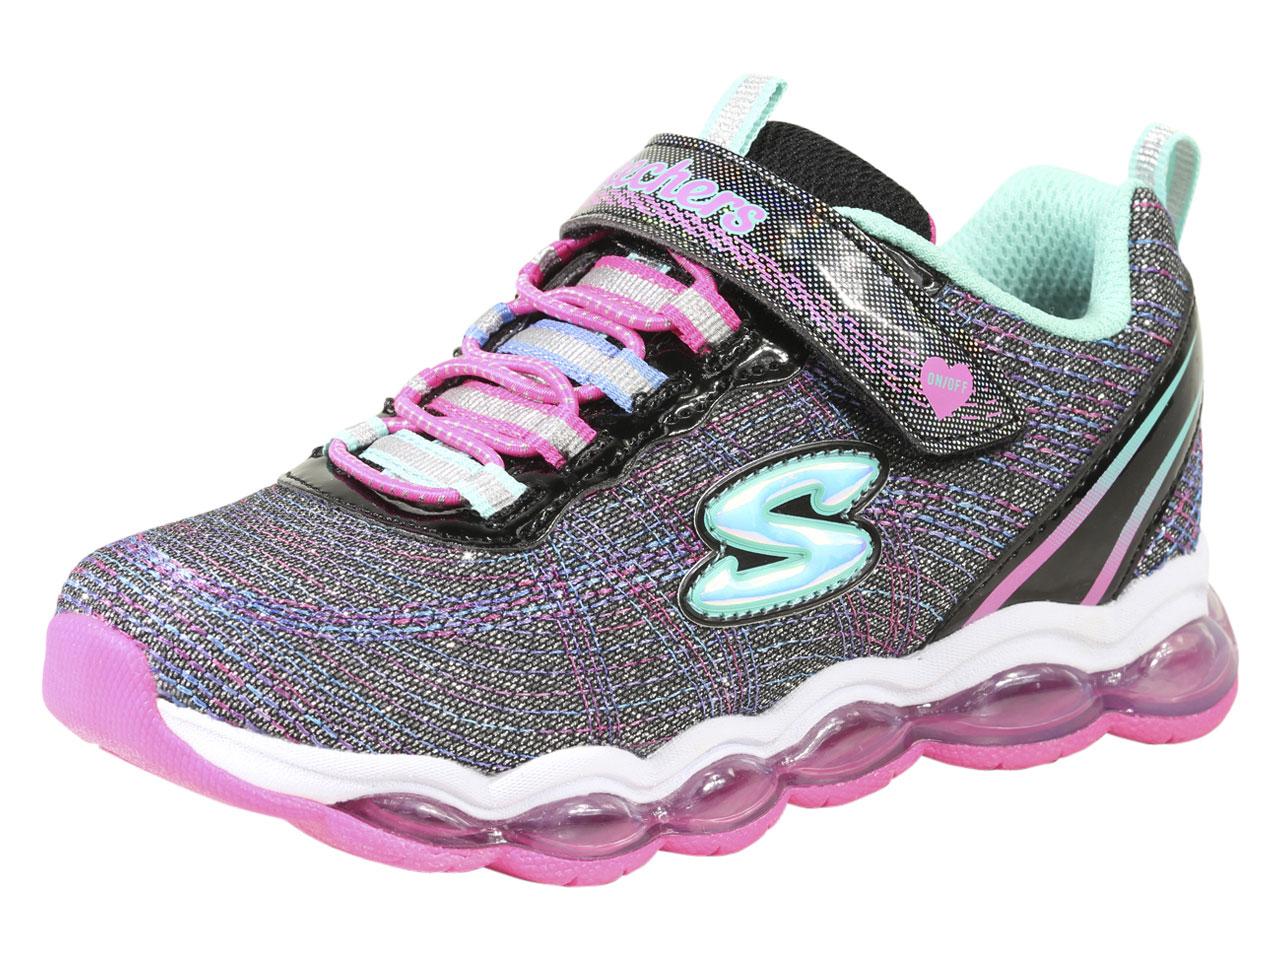 skechers shoes with lights